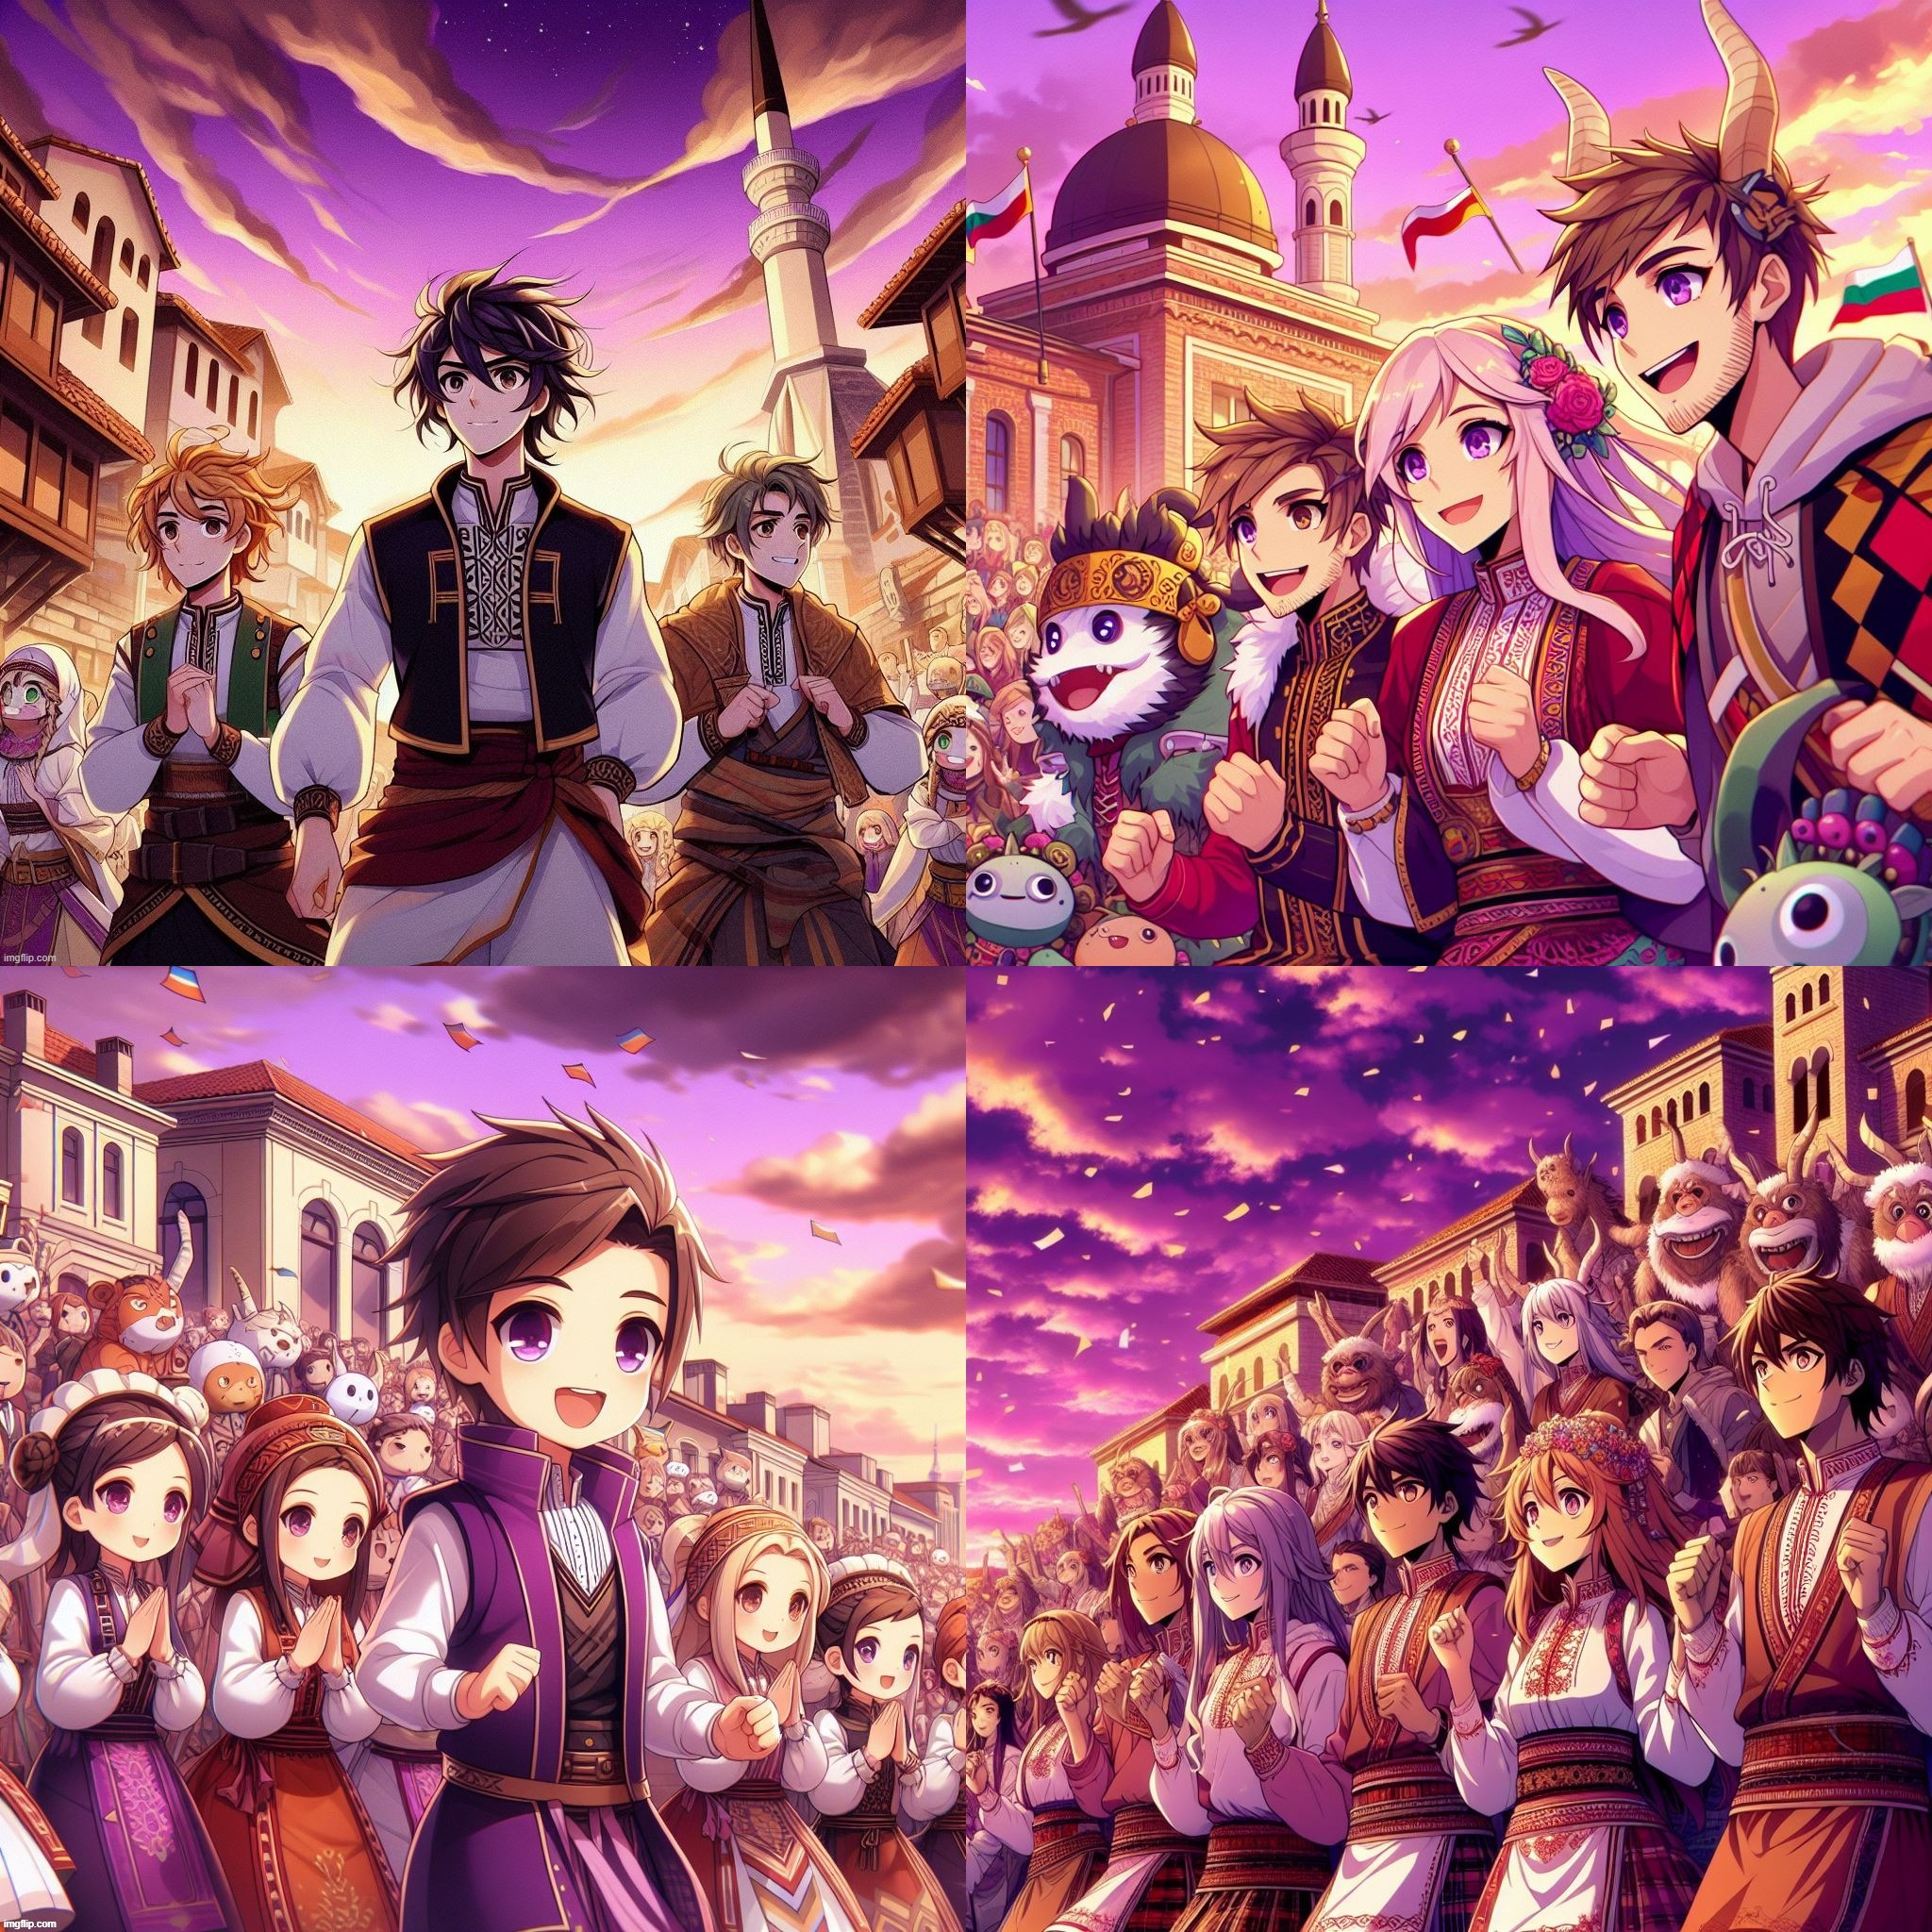 Ai Bing: Anime Vtubers in Bulgarian traditional dress,myths & architecture (ancient, medieval, etc) under purple sky. | image tagged in ai generated,anime,vtuber,parade,bulgaria,fashion | made w/ Imgflip meme maker